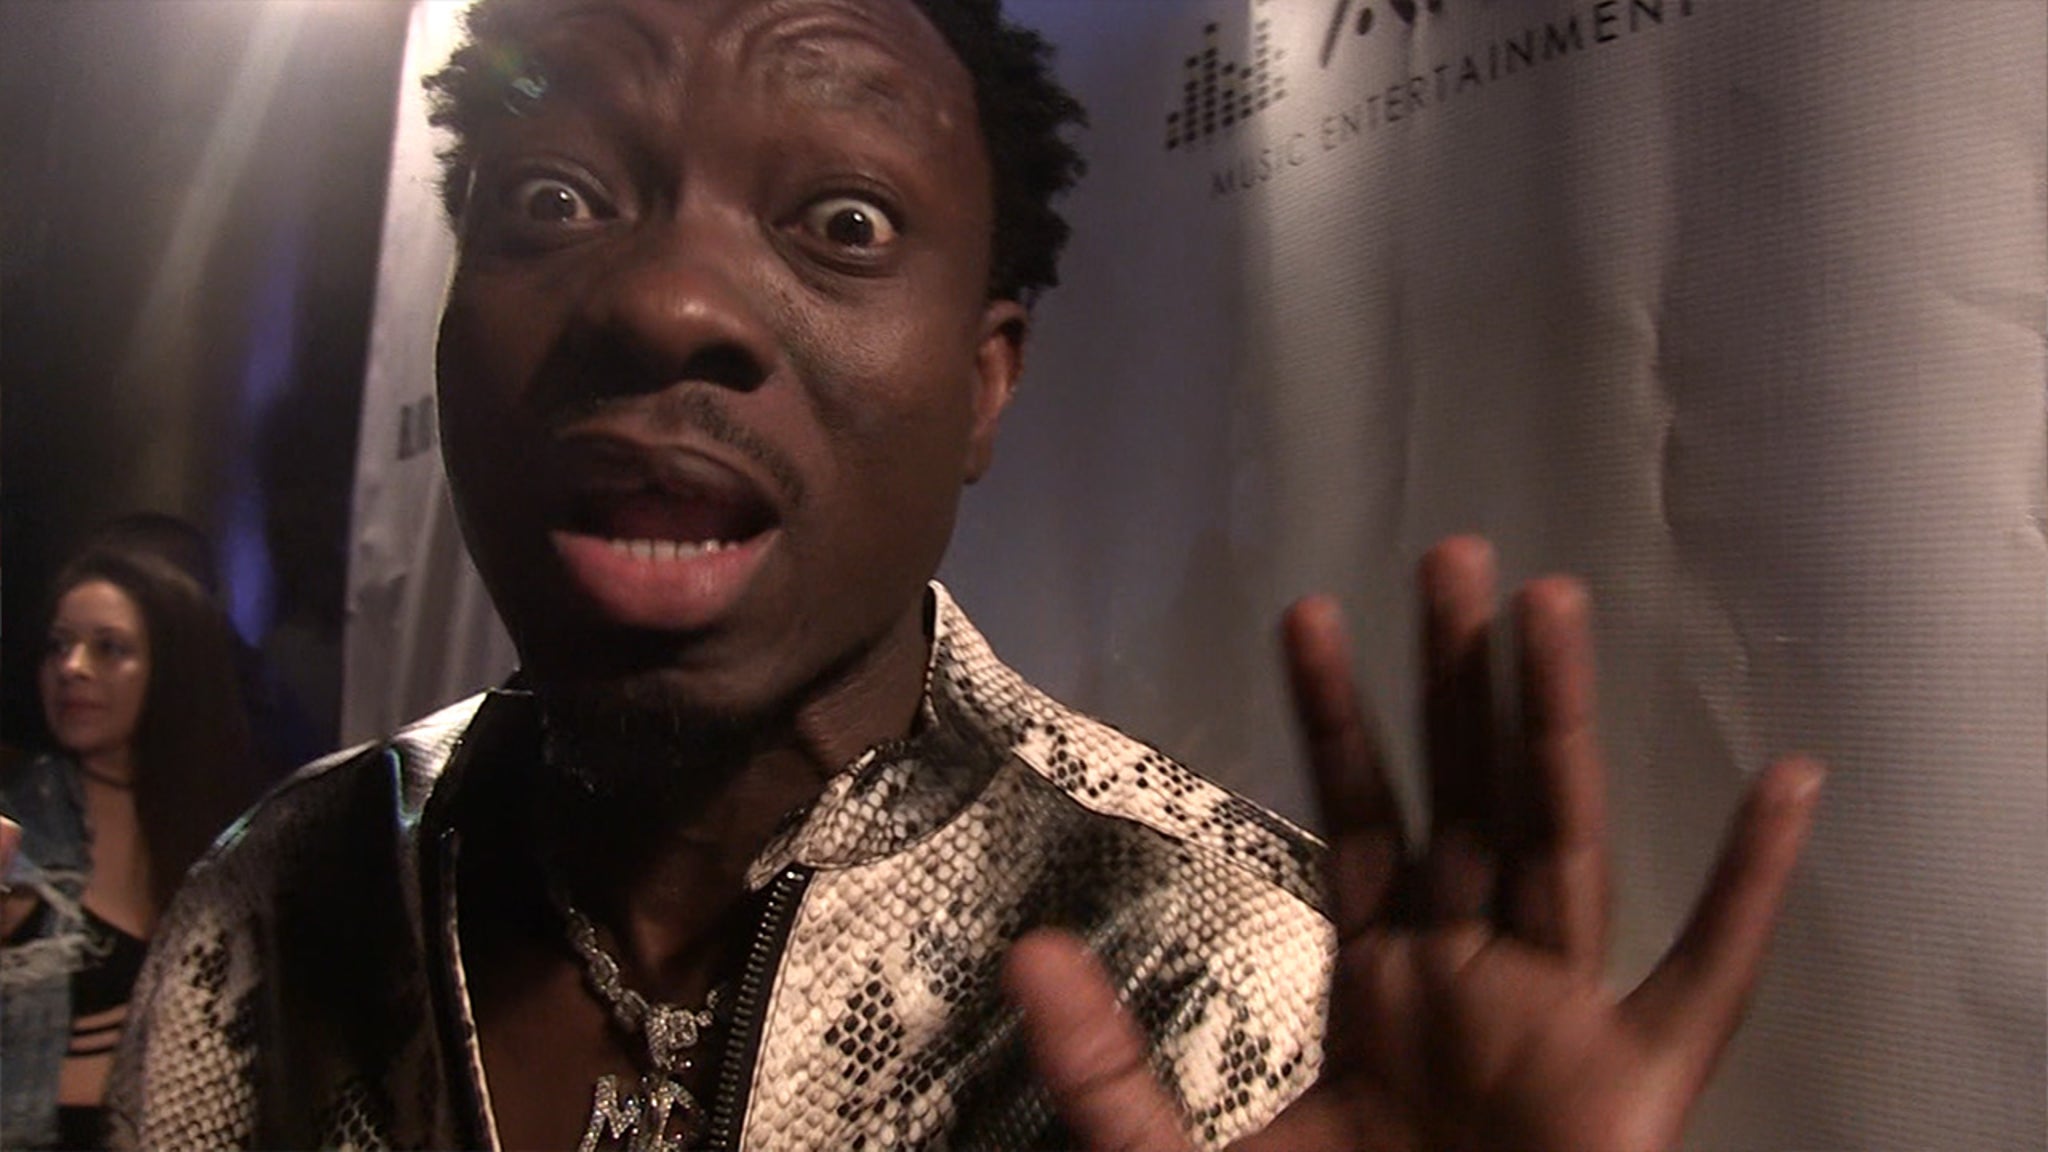 Michael Blackson Gives Props To Montae Nicholson For Not Fighting A Woman